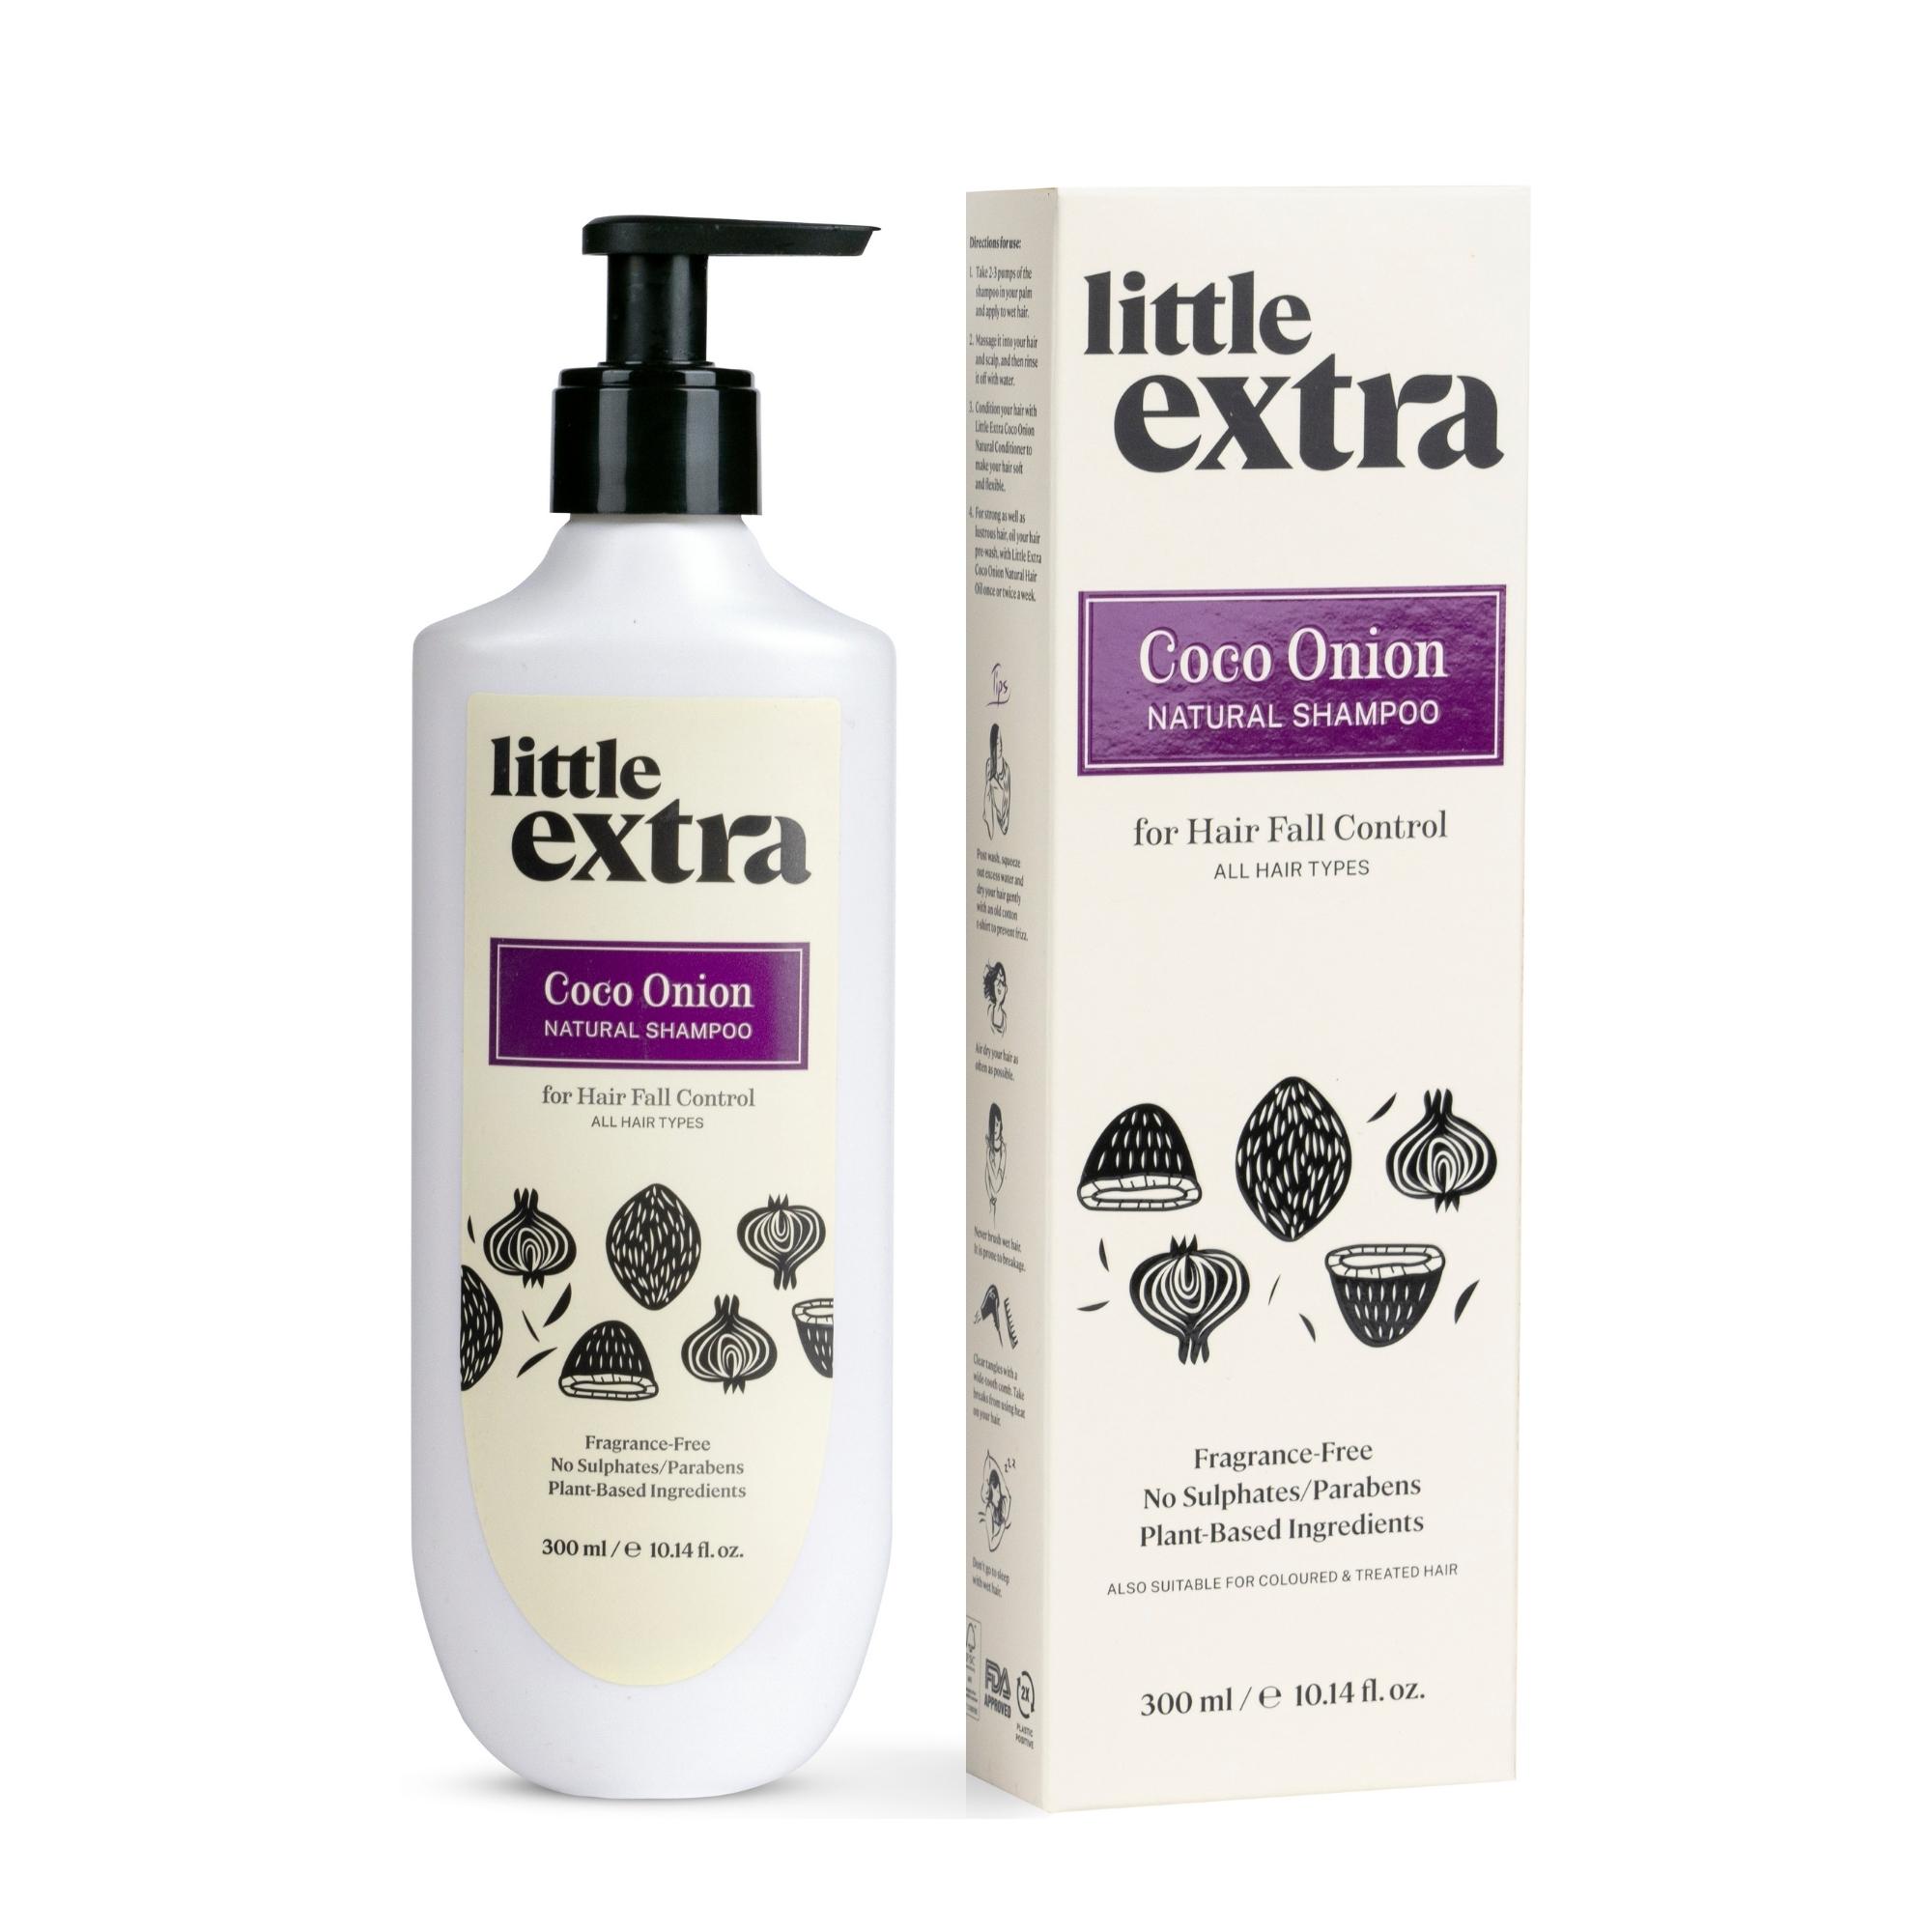 Coco Onion Natural Shampoo to Control Hair Fall - Little Extra